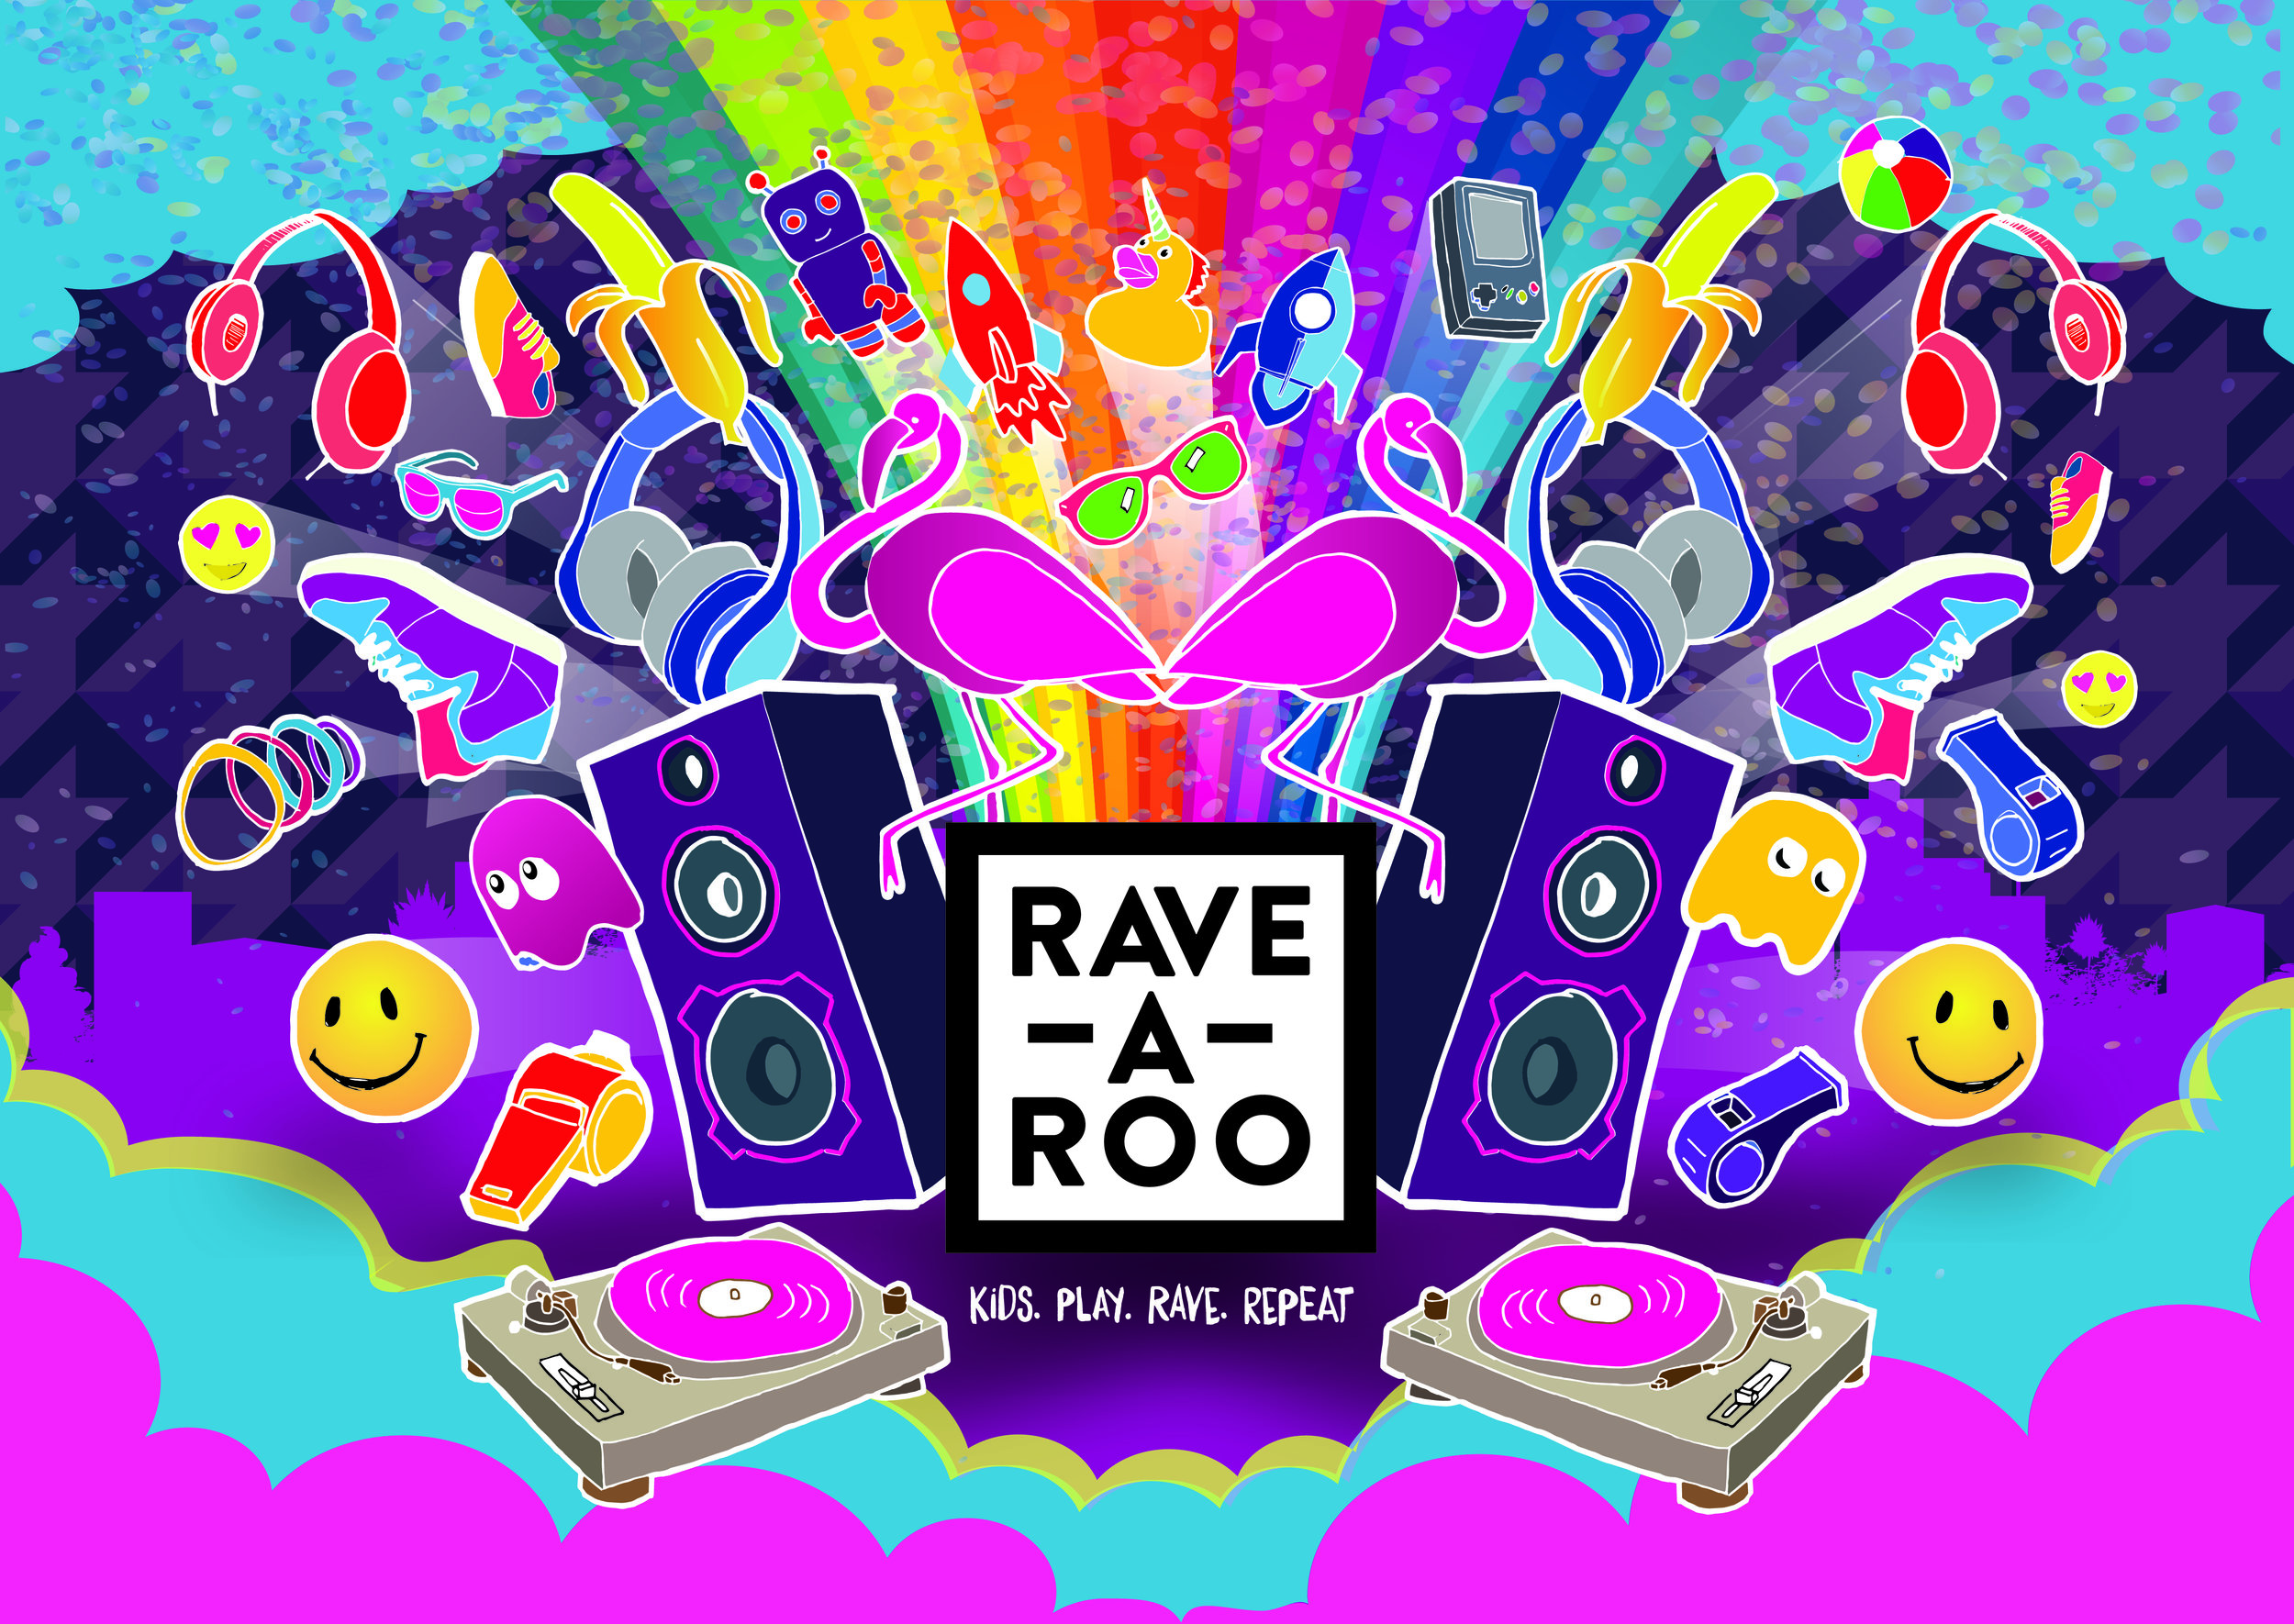 Rave A Roo